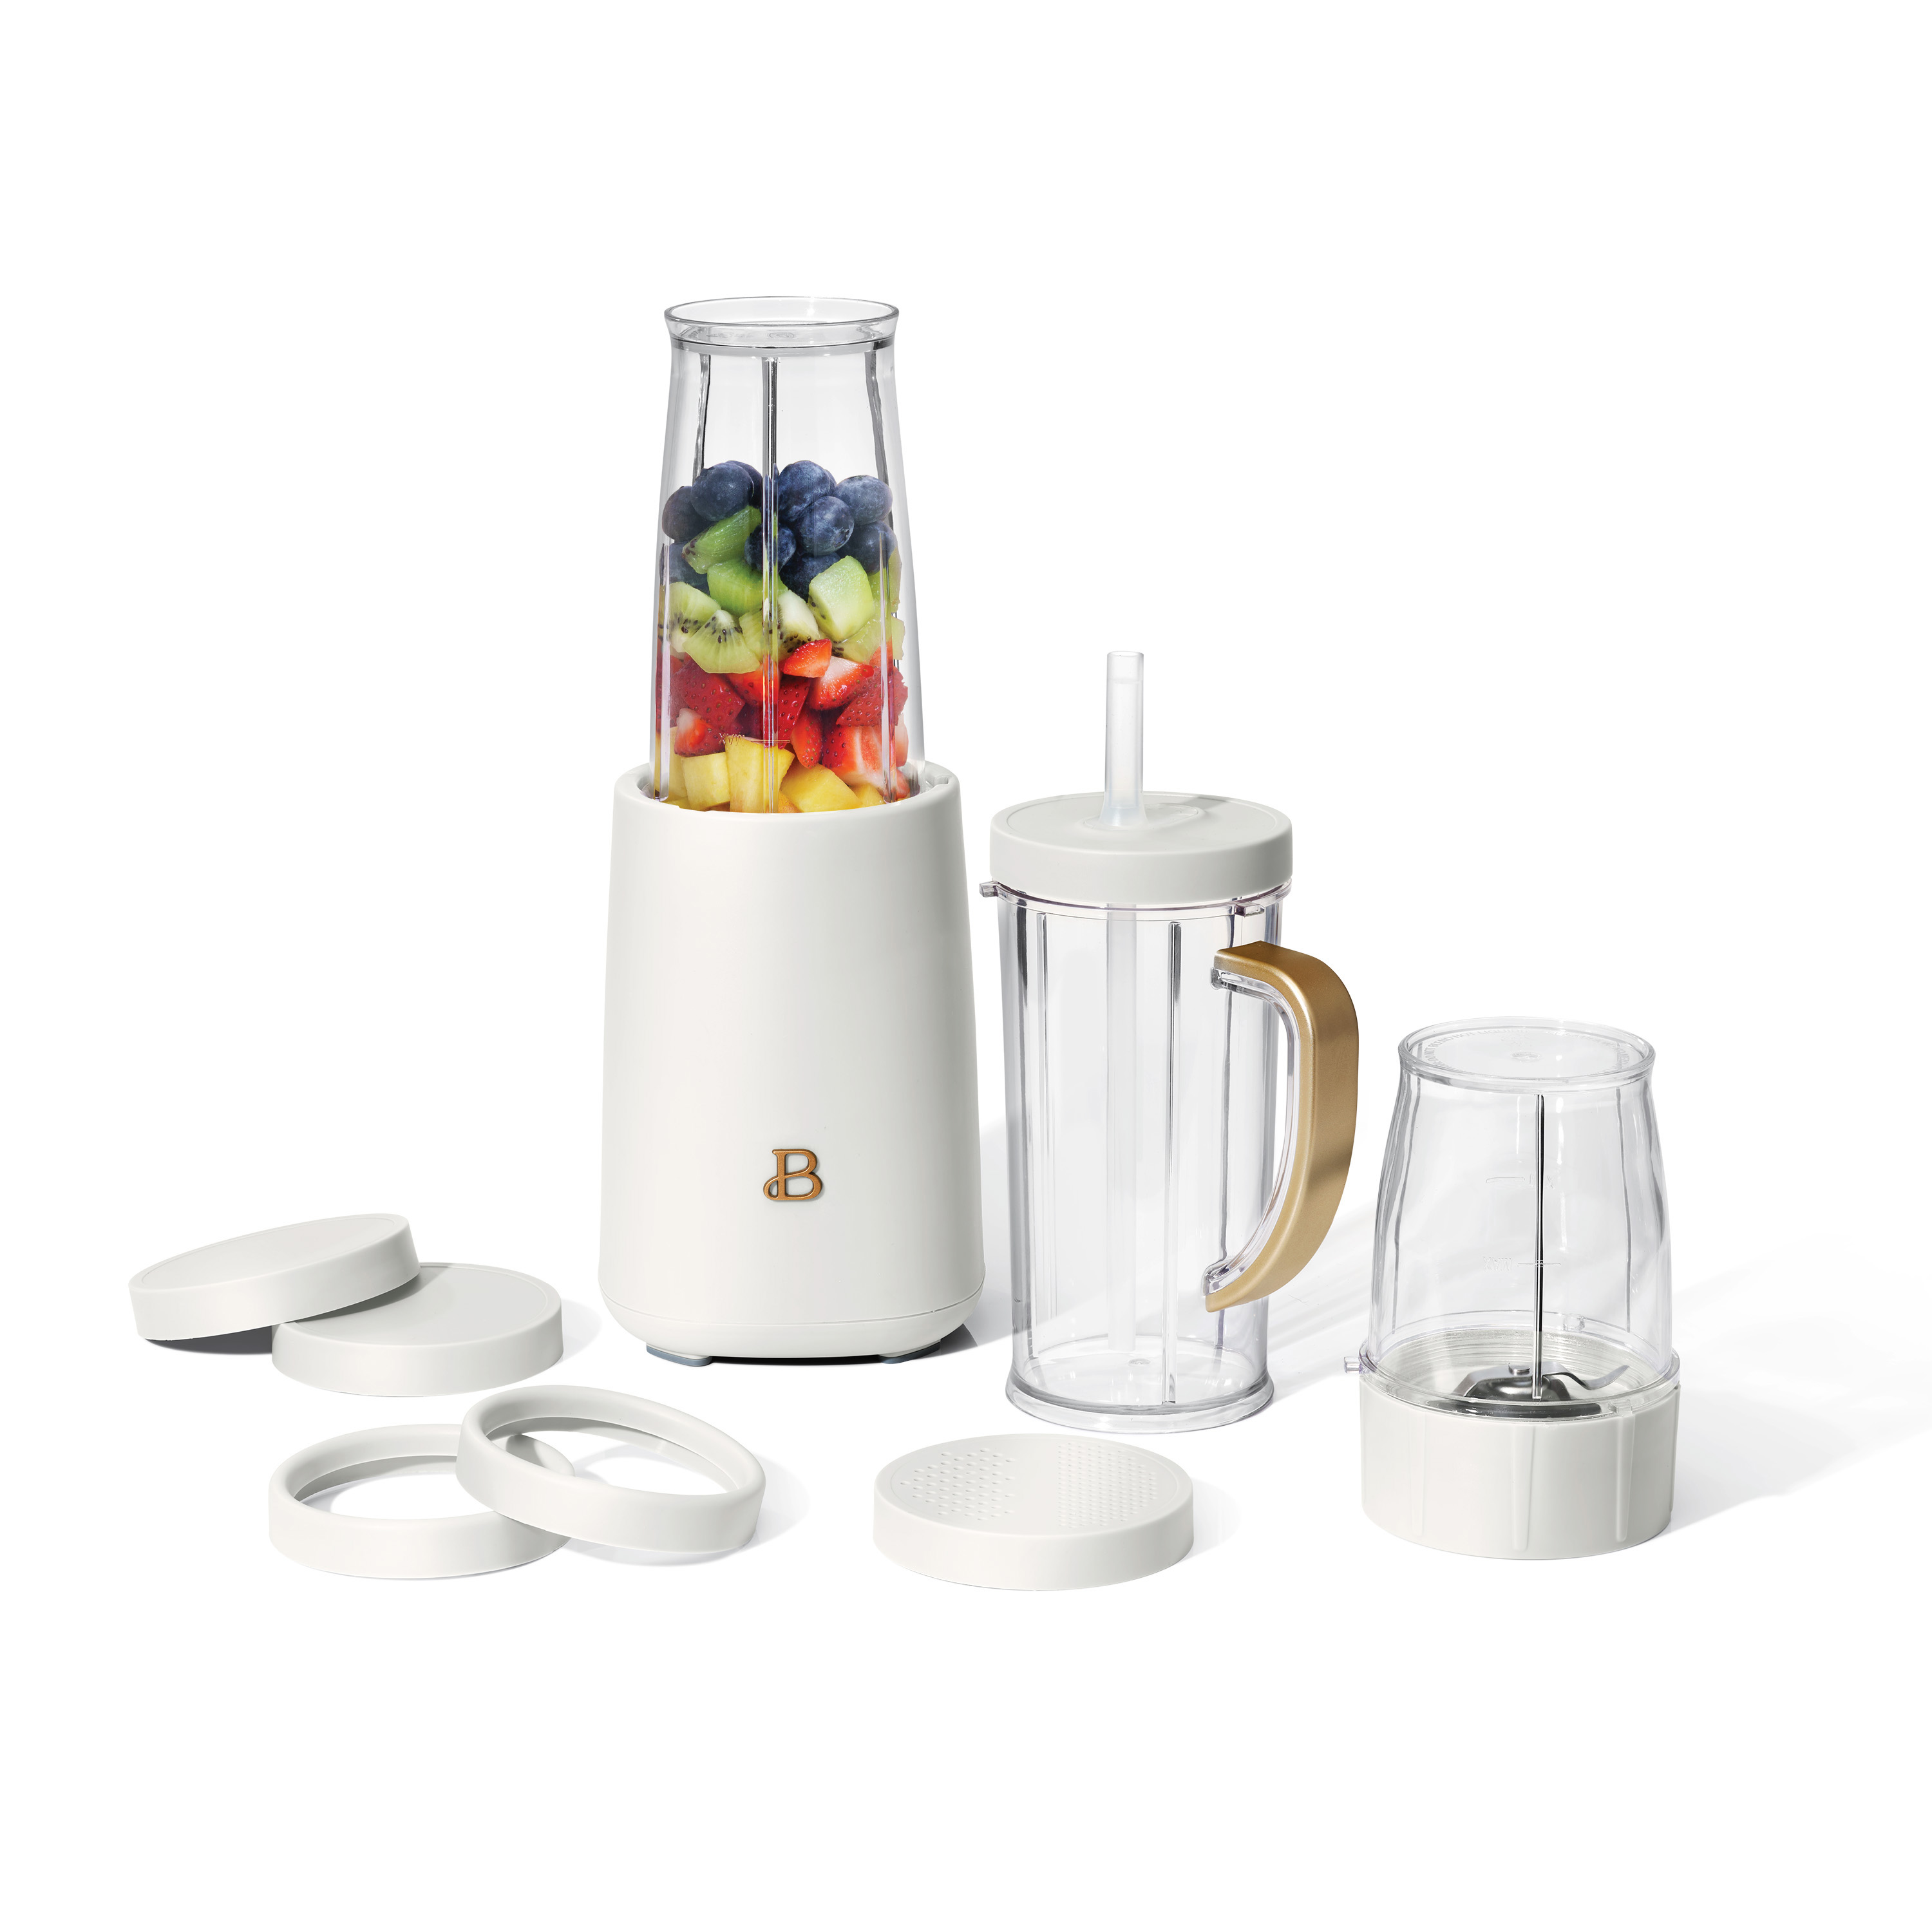 Beautiful Personal Blender Set with 12 Pieces, 240 W, White Icing by Drew Barrymore - image 1 of 13